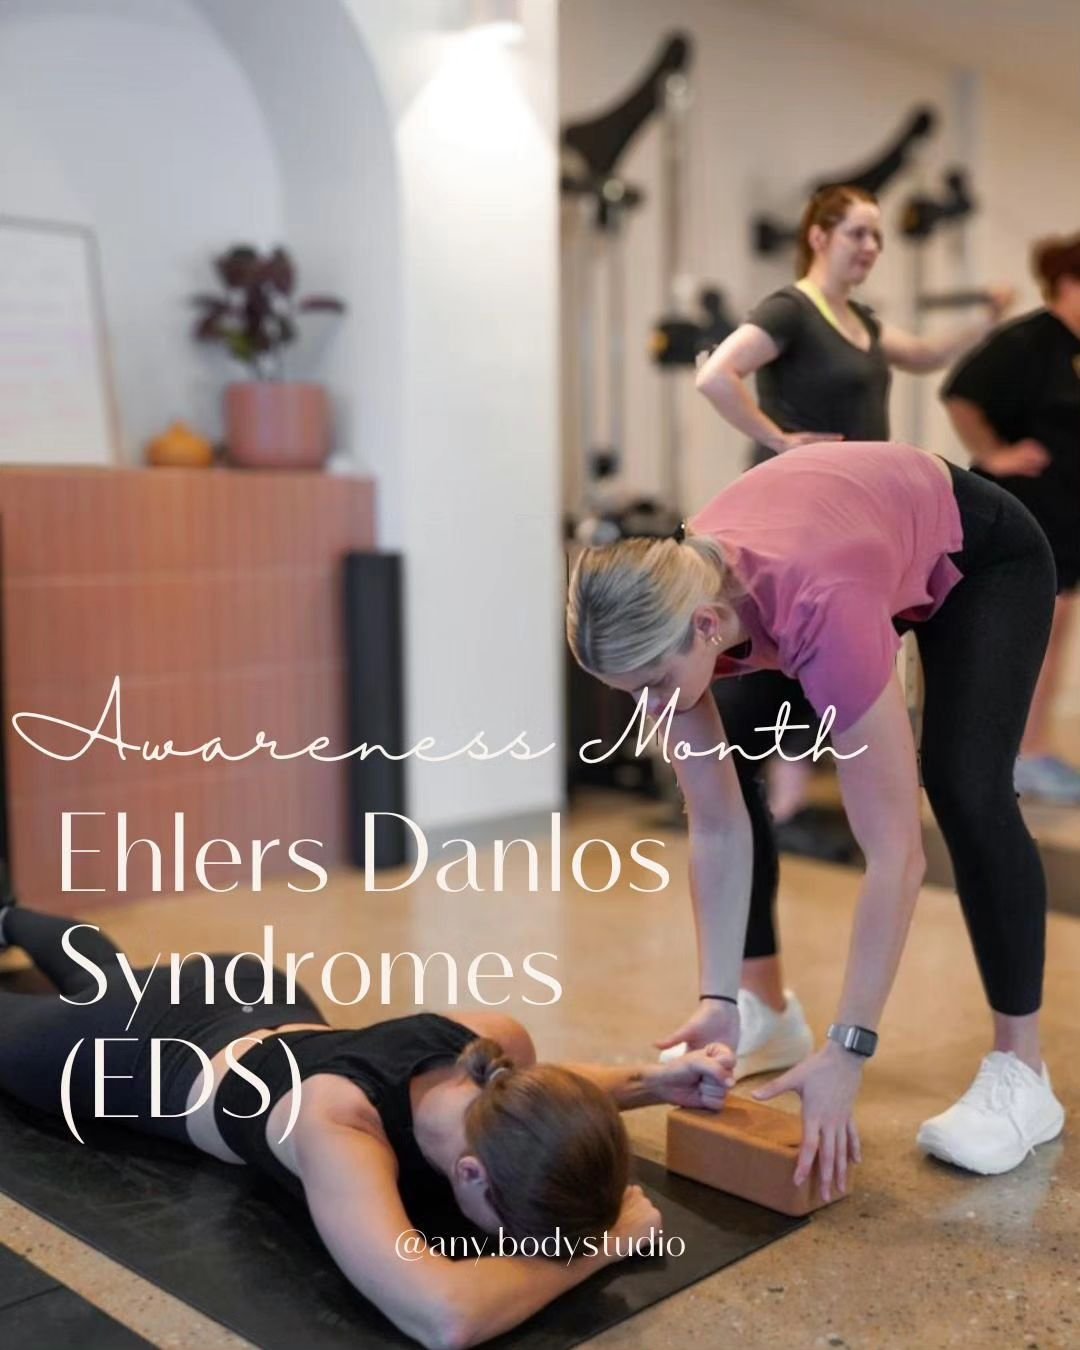 &quot;🦓 May is Ehlers-Danlos Syndromes Awareness Month! 🦓

Let's shed light on this rare genetic connective tissue disorder that affects many individuals worldwide. #EDSAwareness

Some common signs and symptoms of Ehlers-Danlos Syndromes (EDS) incl